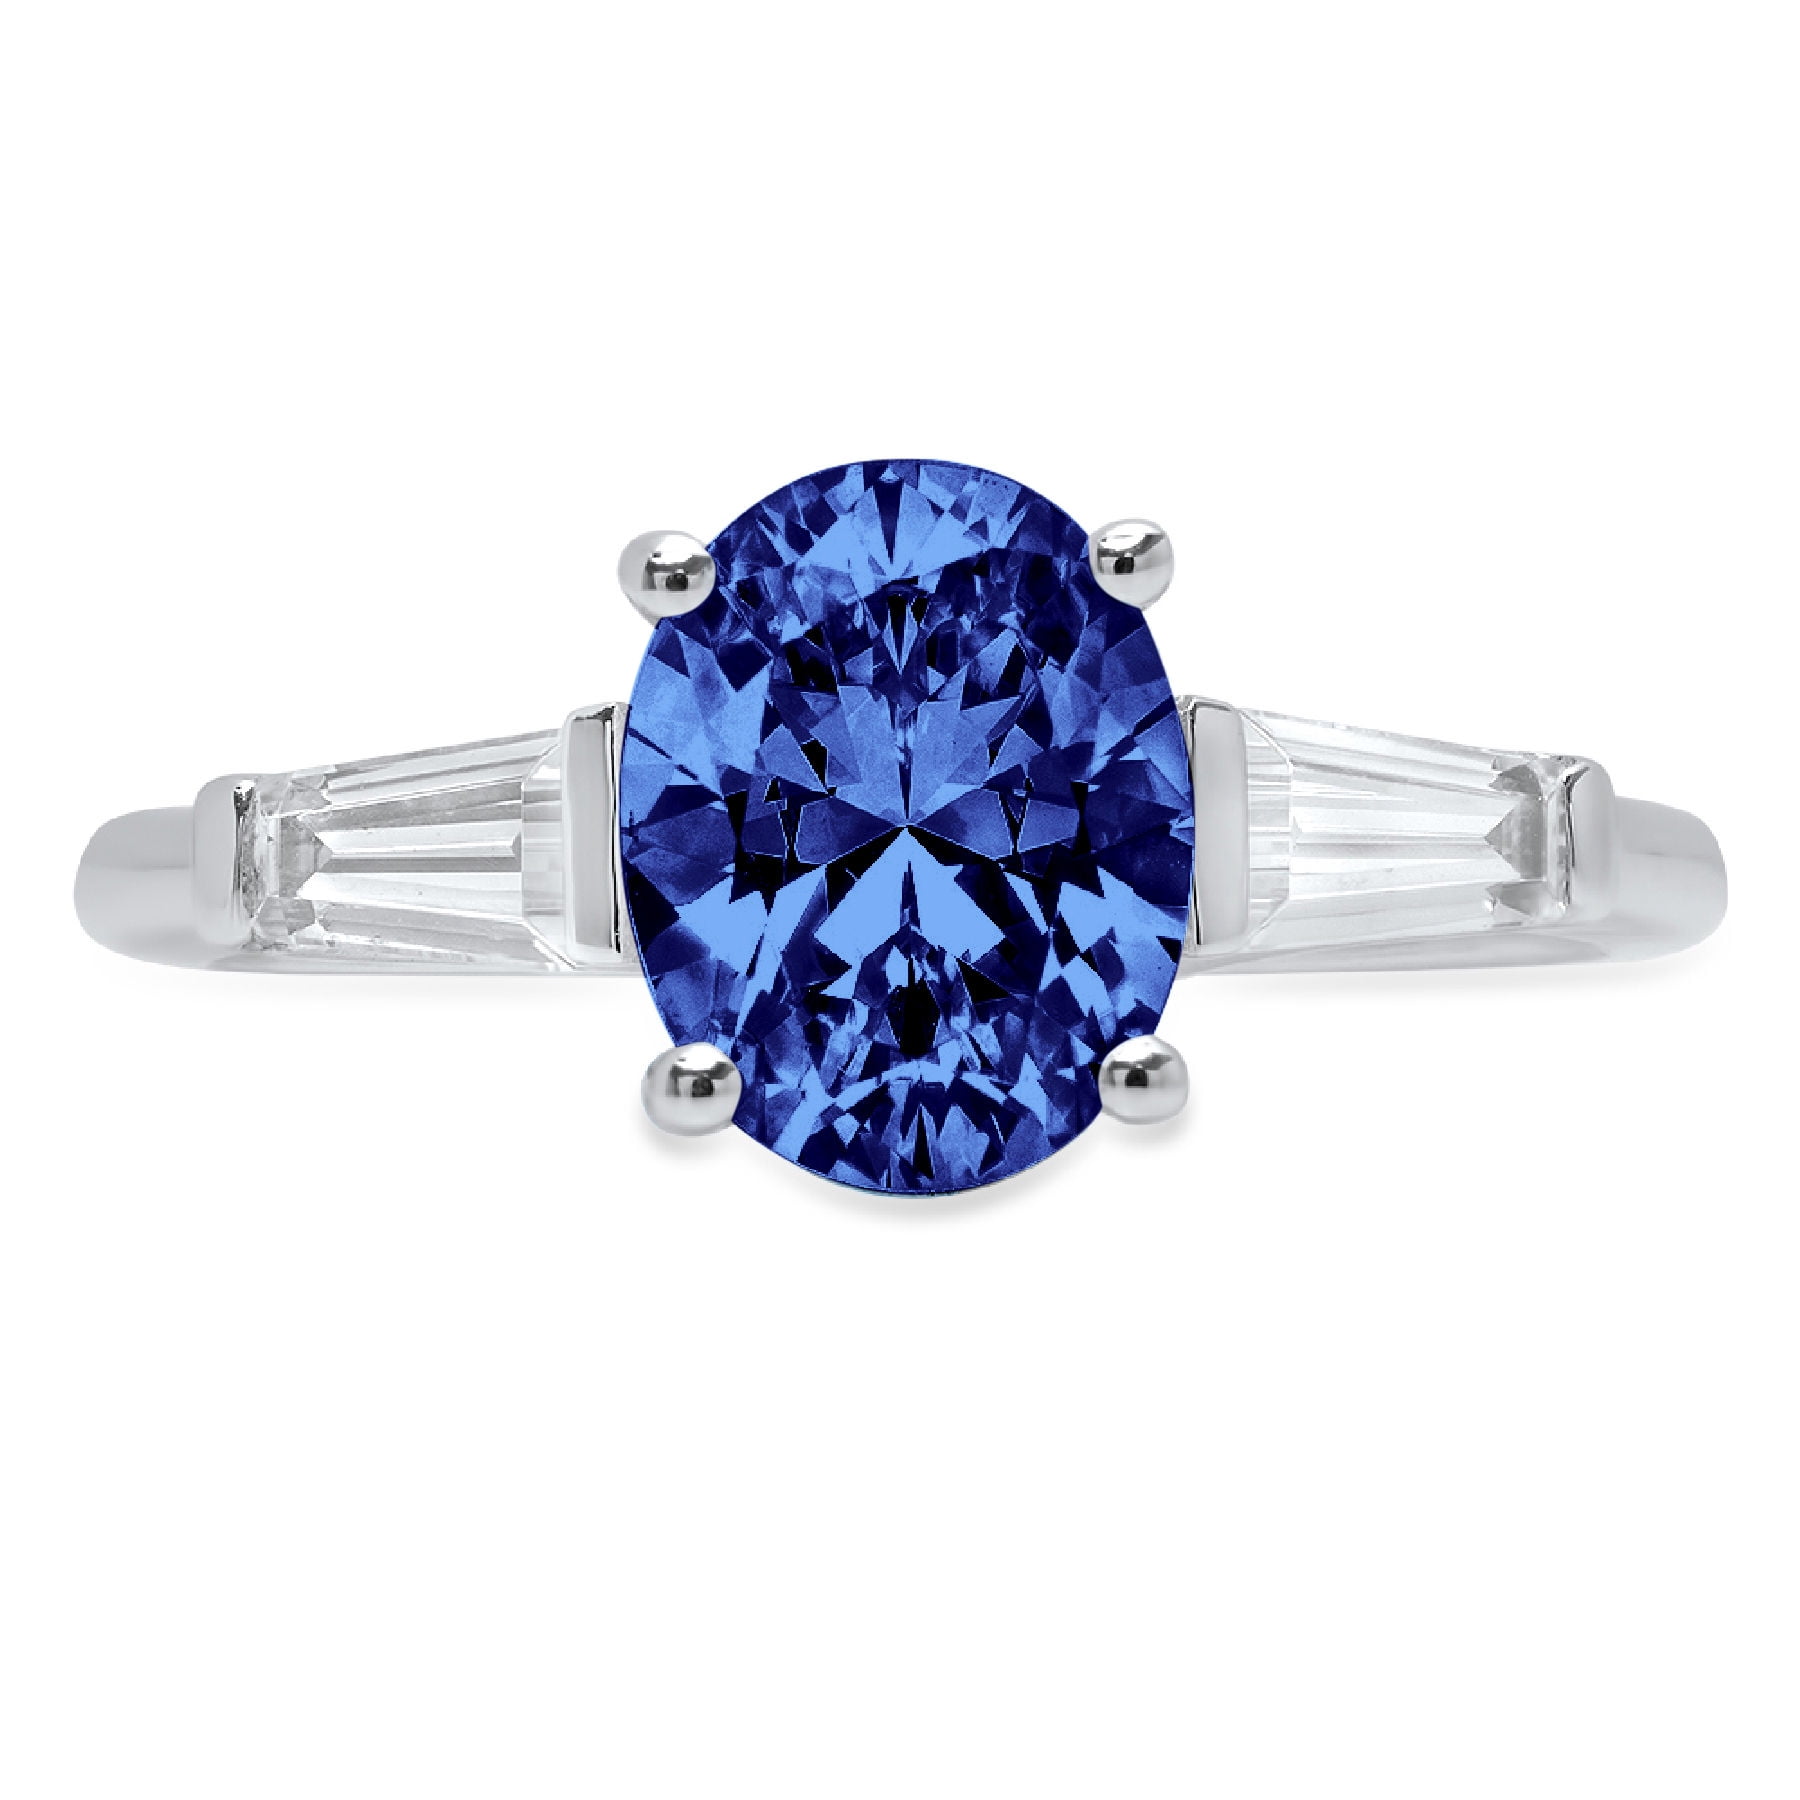 2.5 ct  Pear Cut Designer Genuine Flawless VVS1 Blue Simulated Diamond 14K 18K White Gold Solitaire Ring